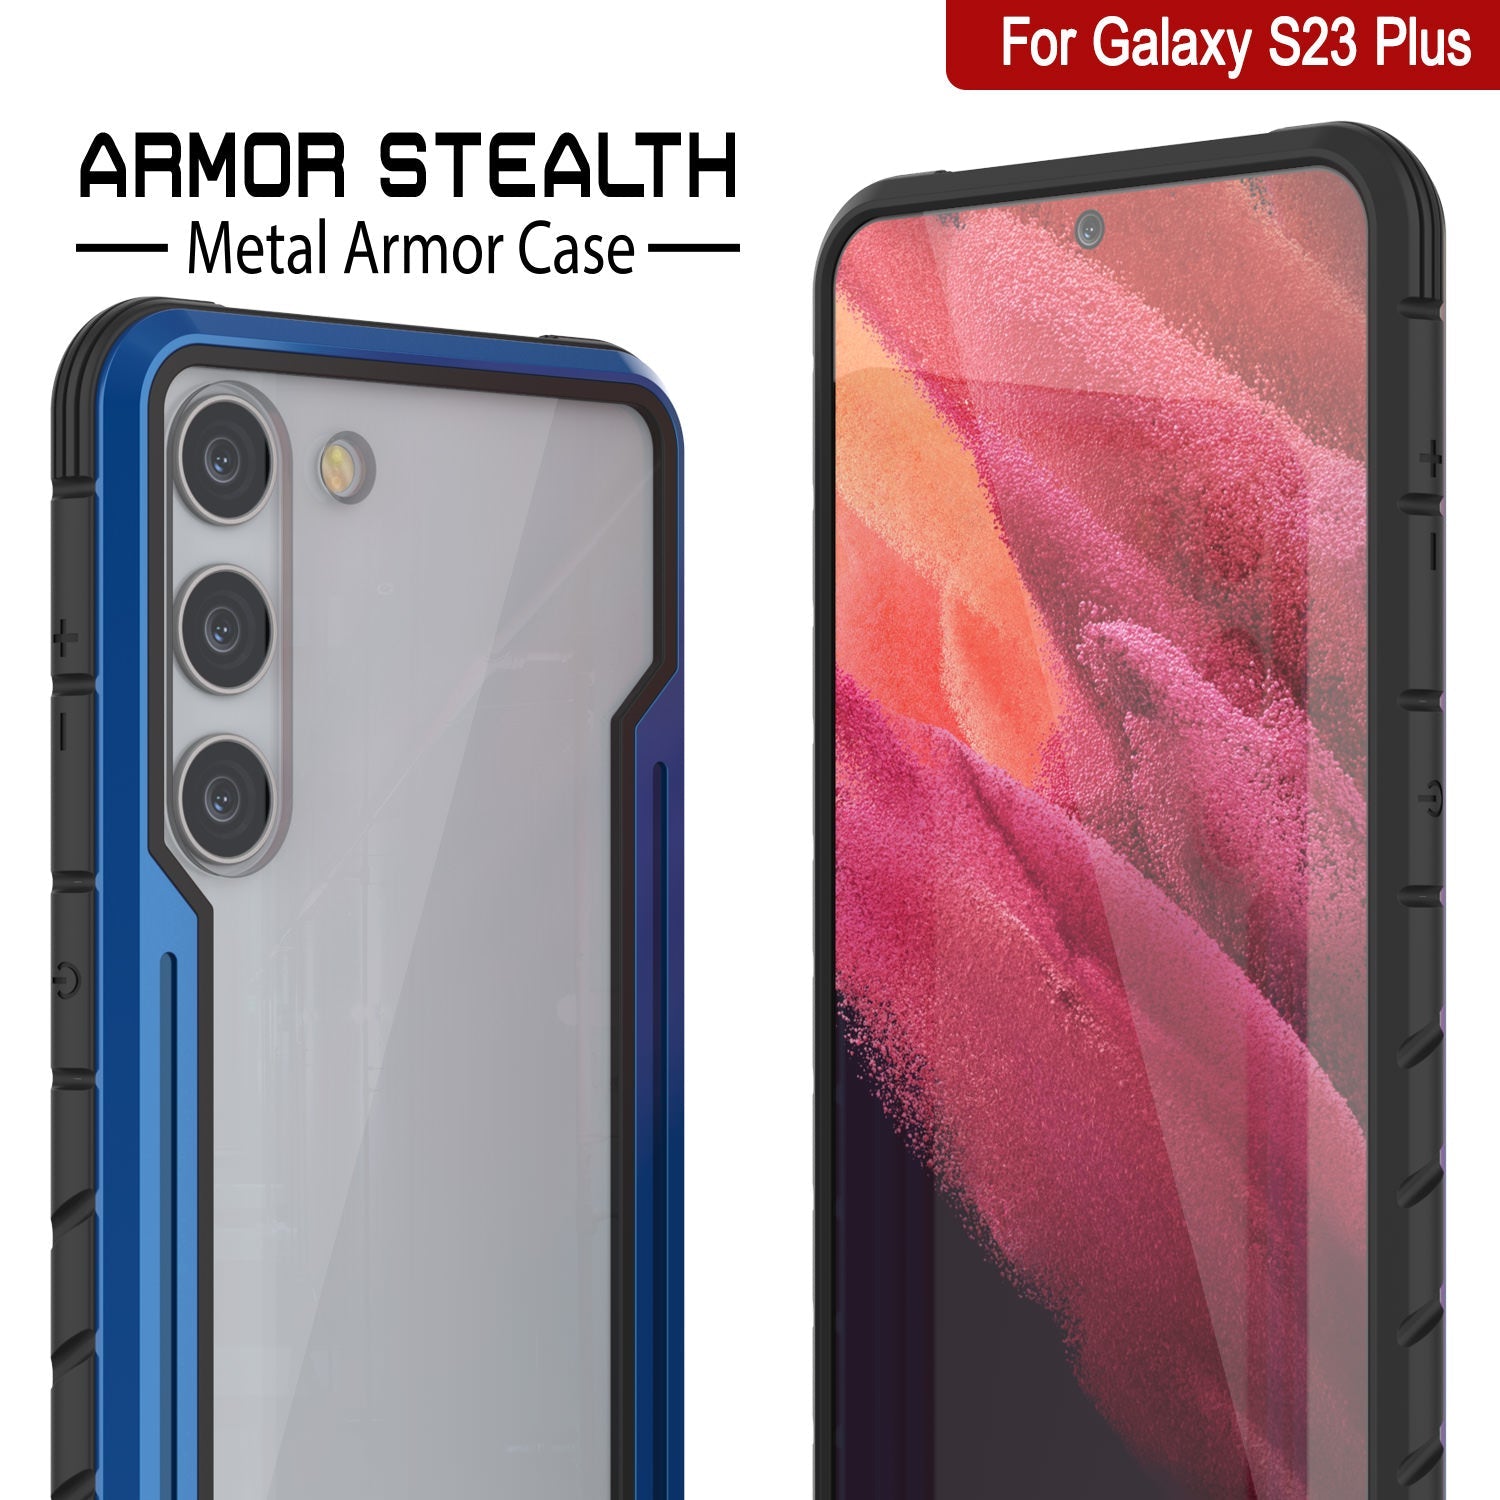 Punkcase S23+ Plus Armor Stealth Case Protective Military Grade Multilayer Cover [Navy Blue]